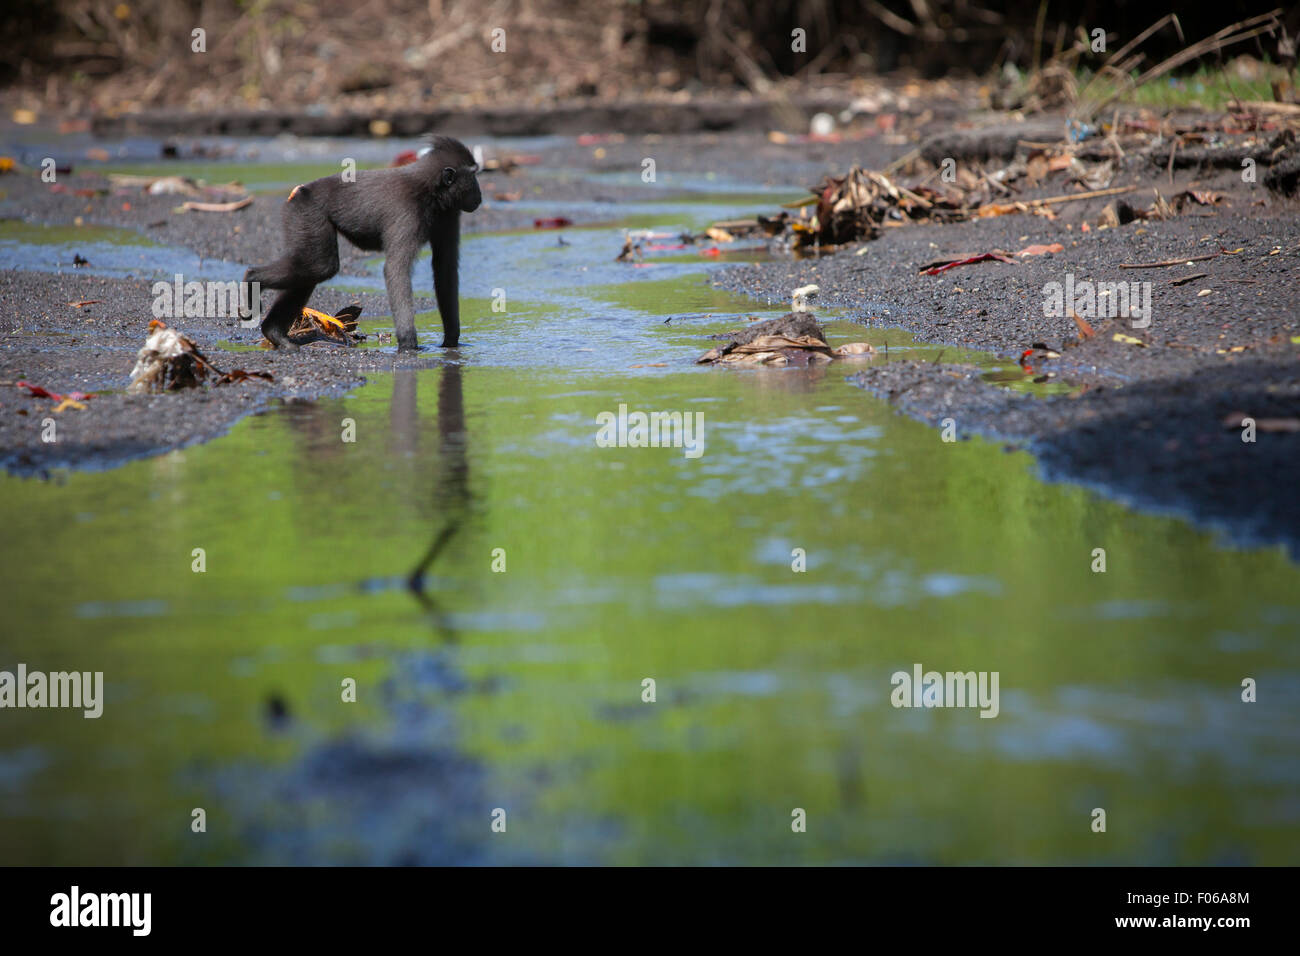 A young Sulawesi black-crested macaque (Macaca nigra) is photographed on a stream in Tangkoko Nature Reserve, North Sulawesi, Indonesia. Stock Photo